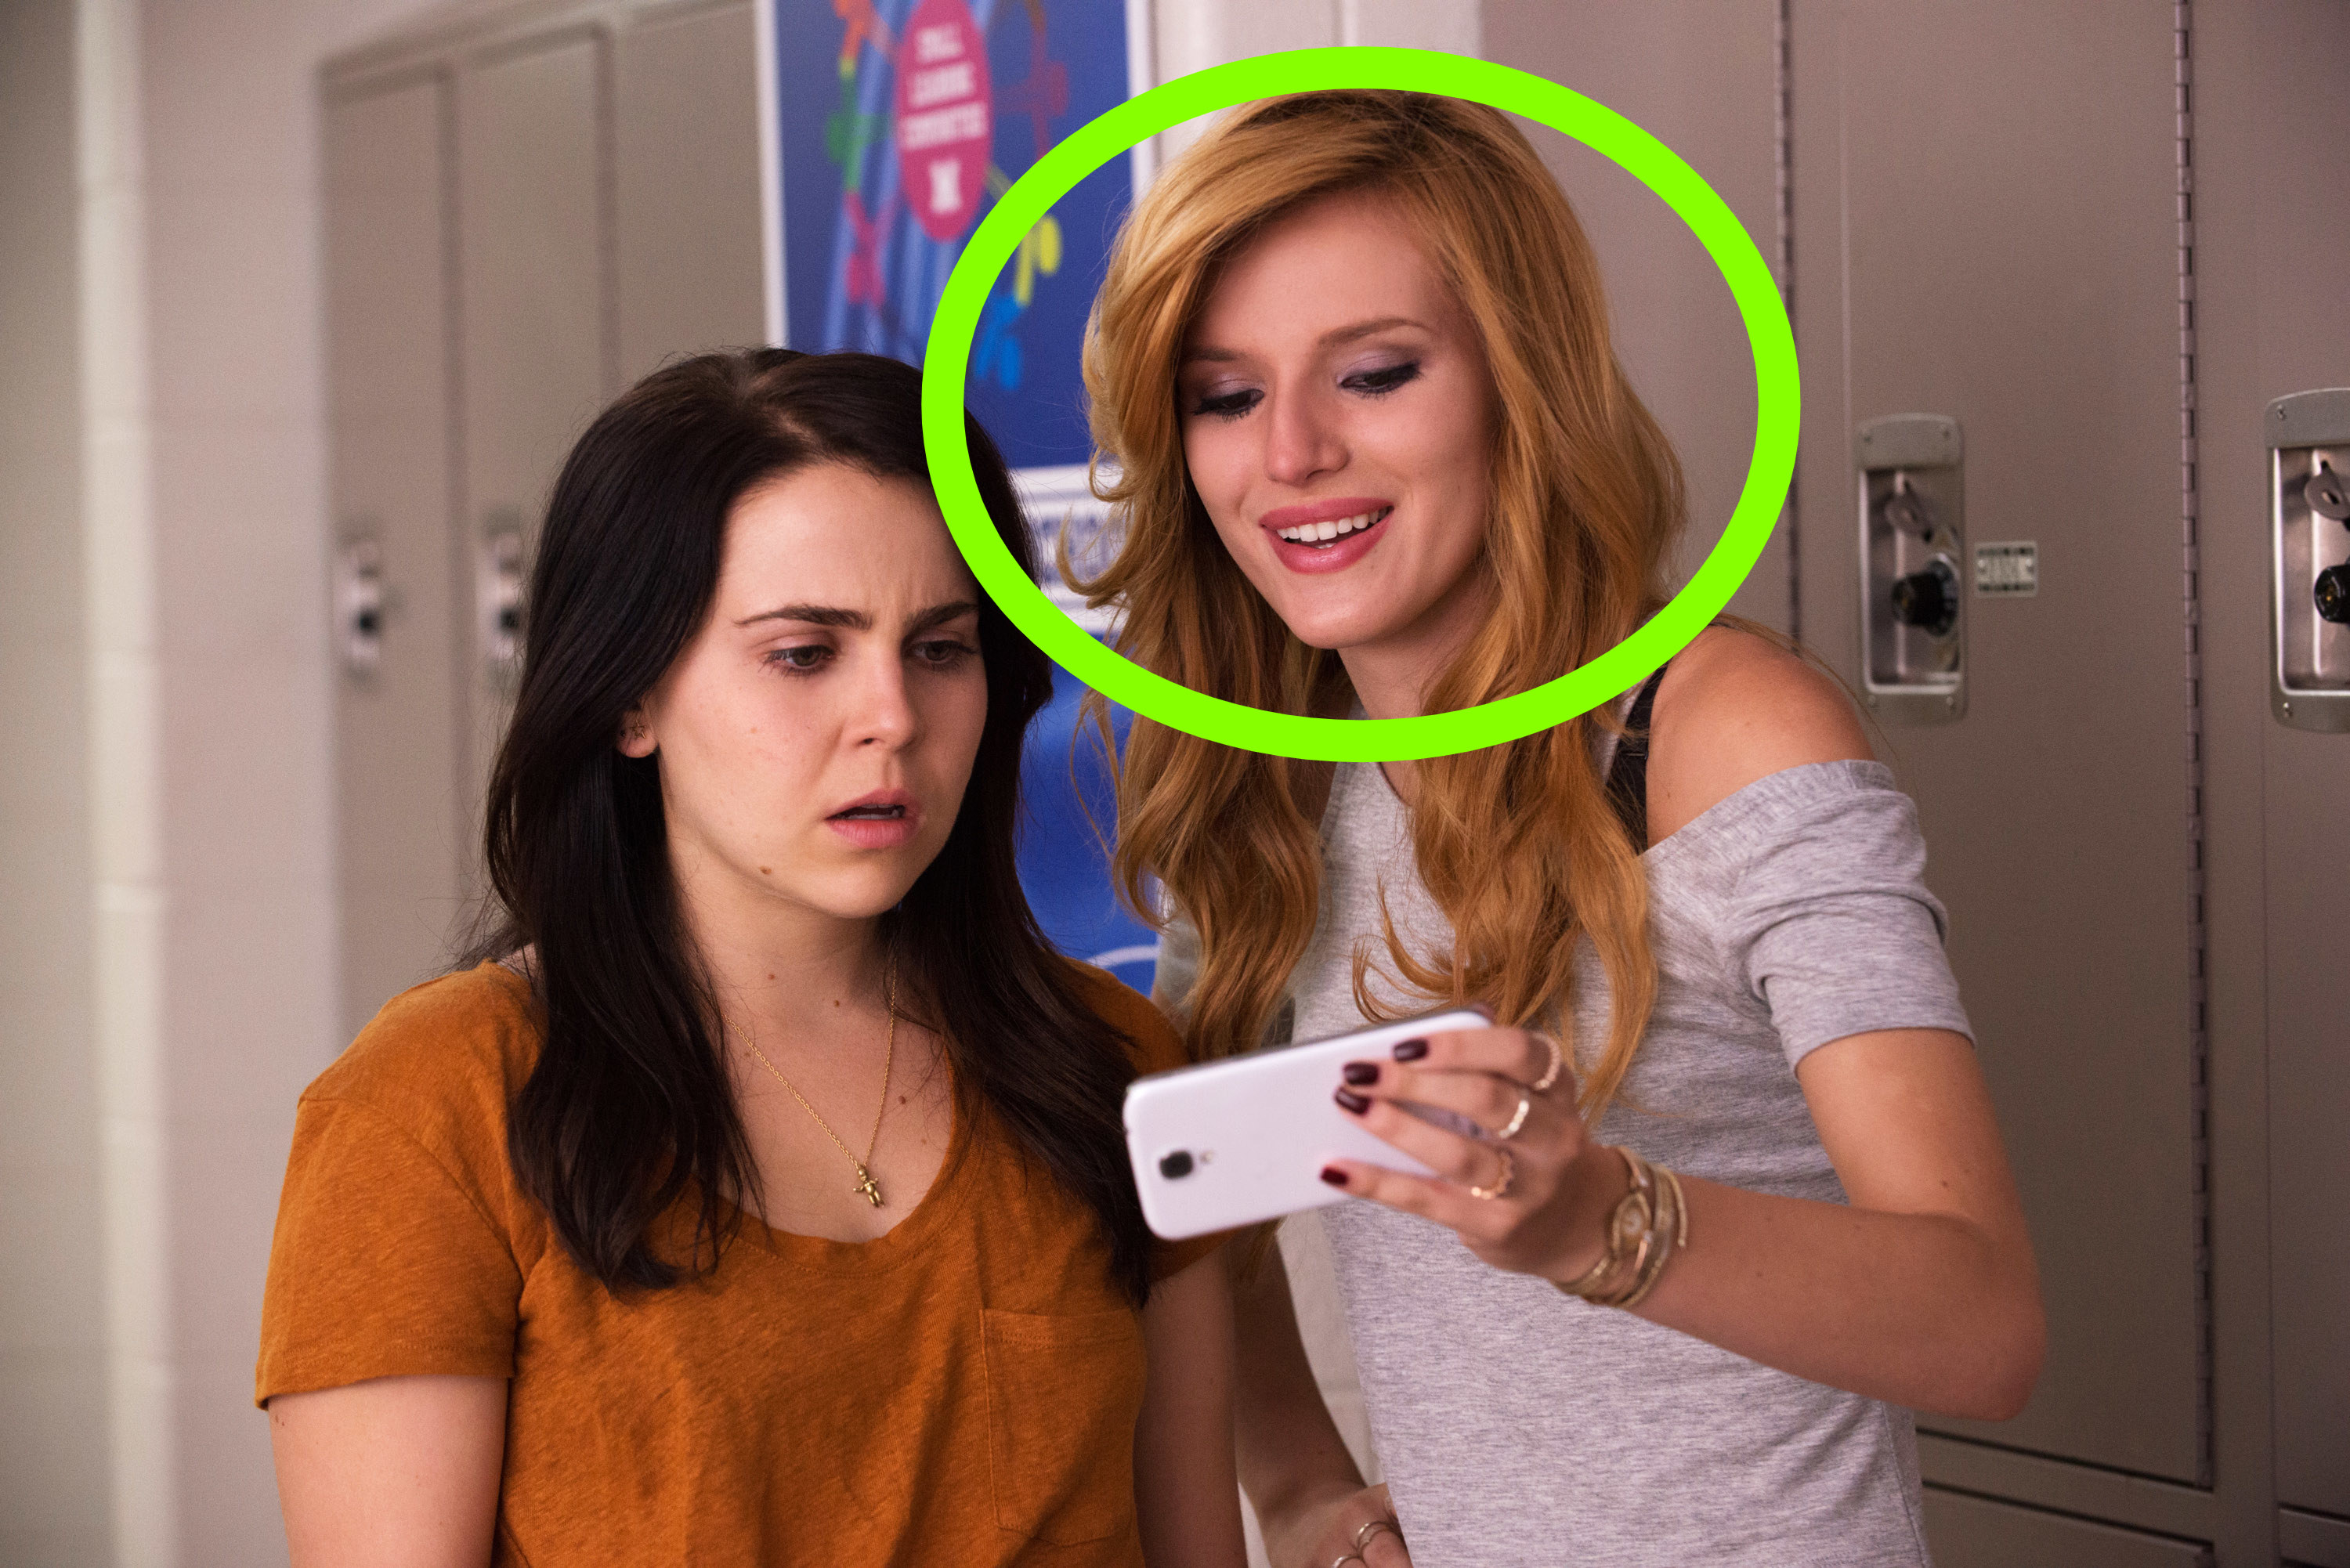 Bella showing Mae her phone in the school hallway in the film